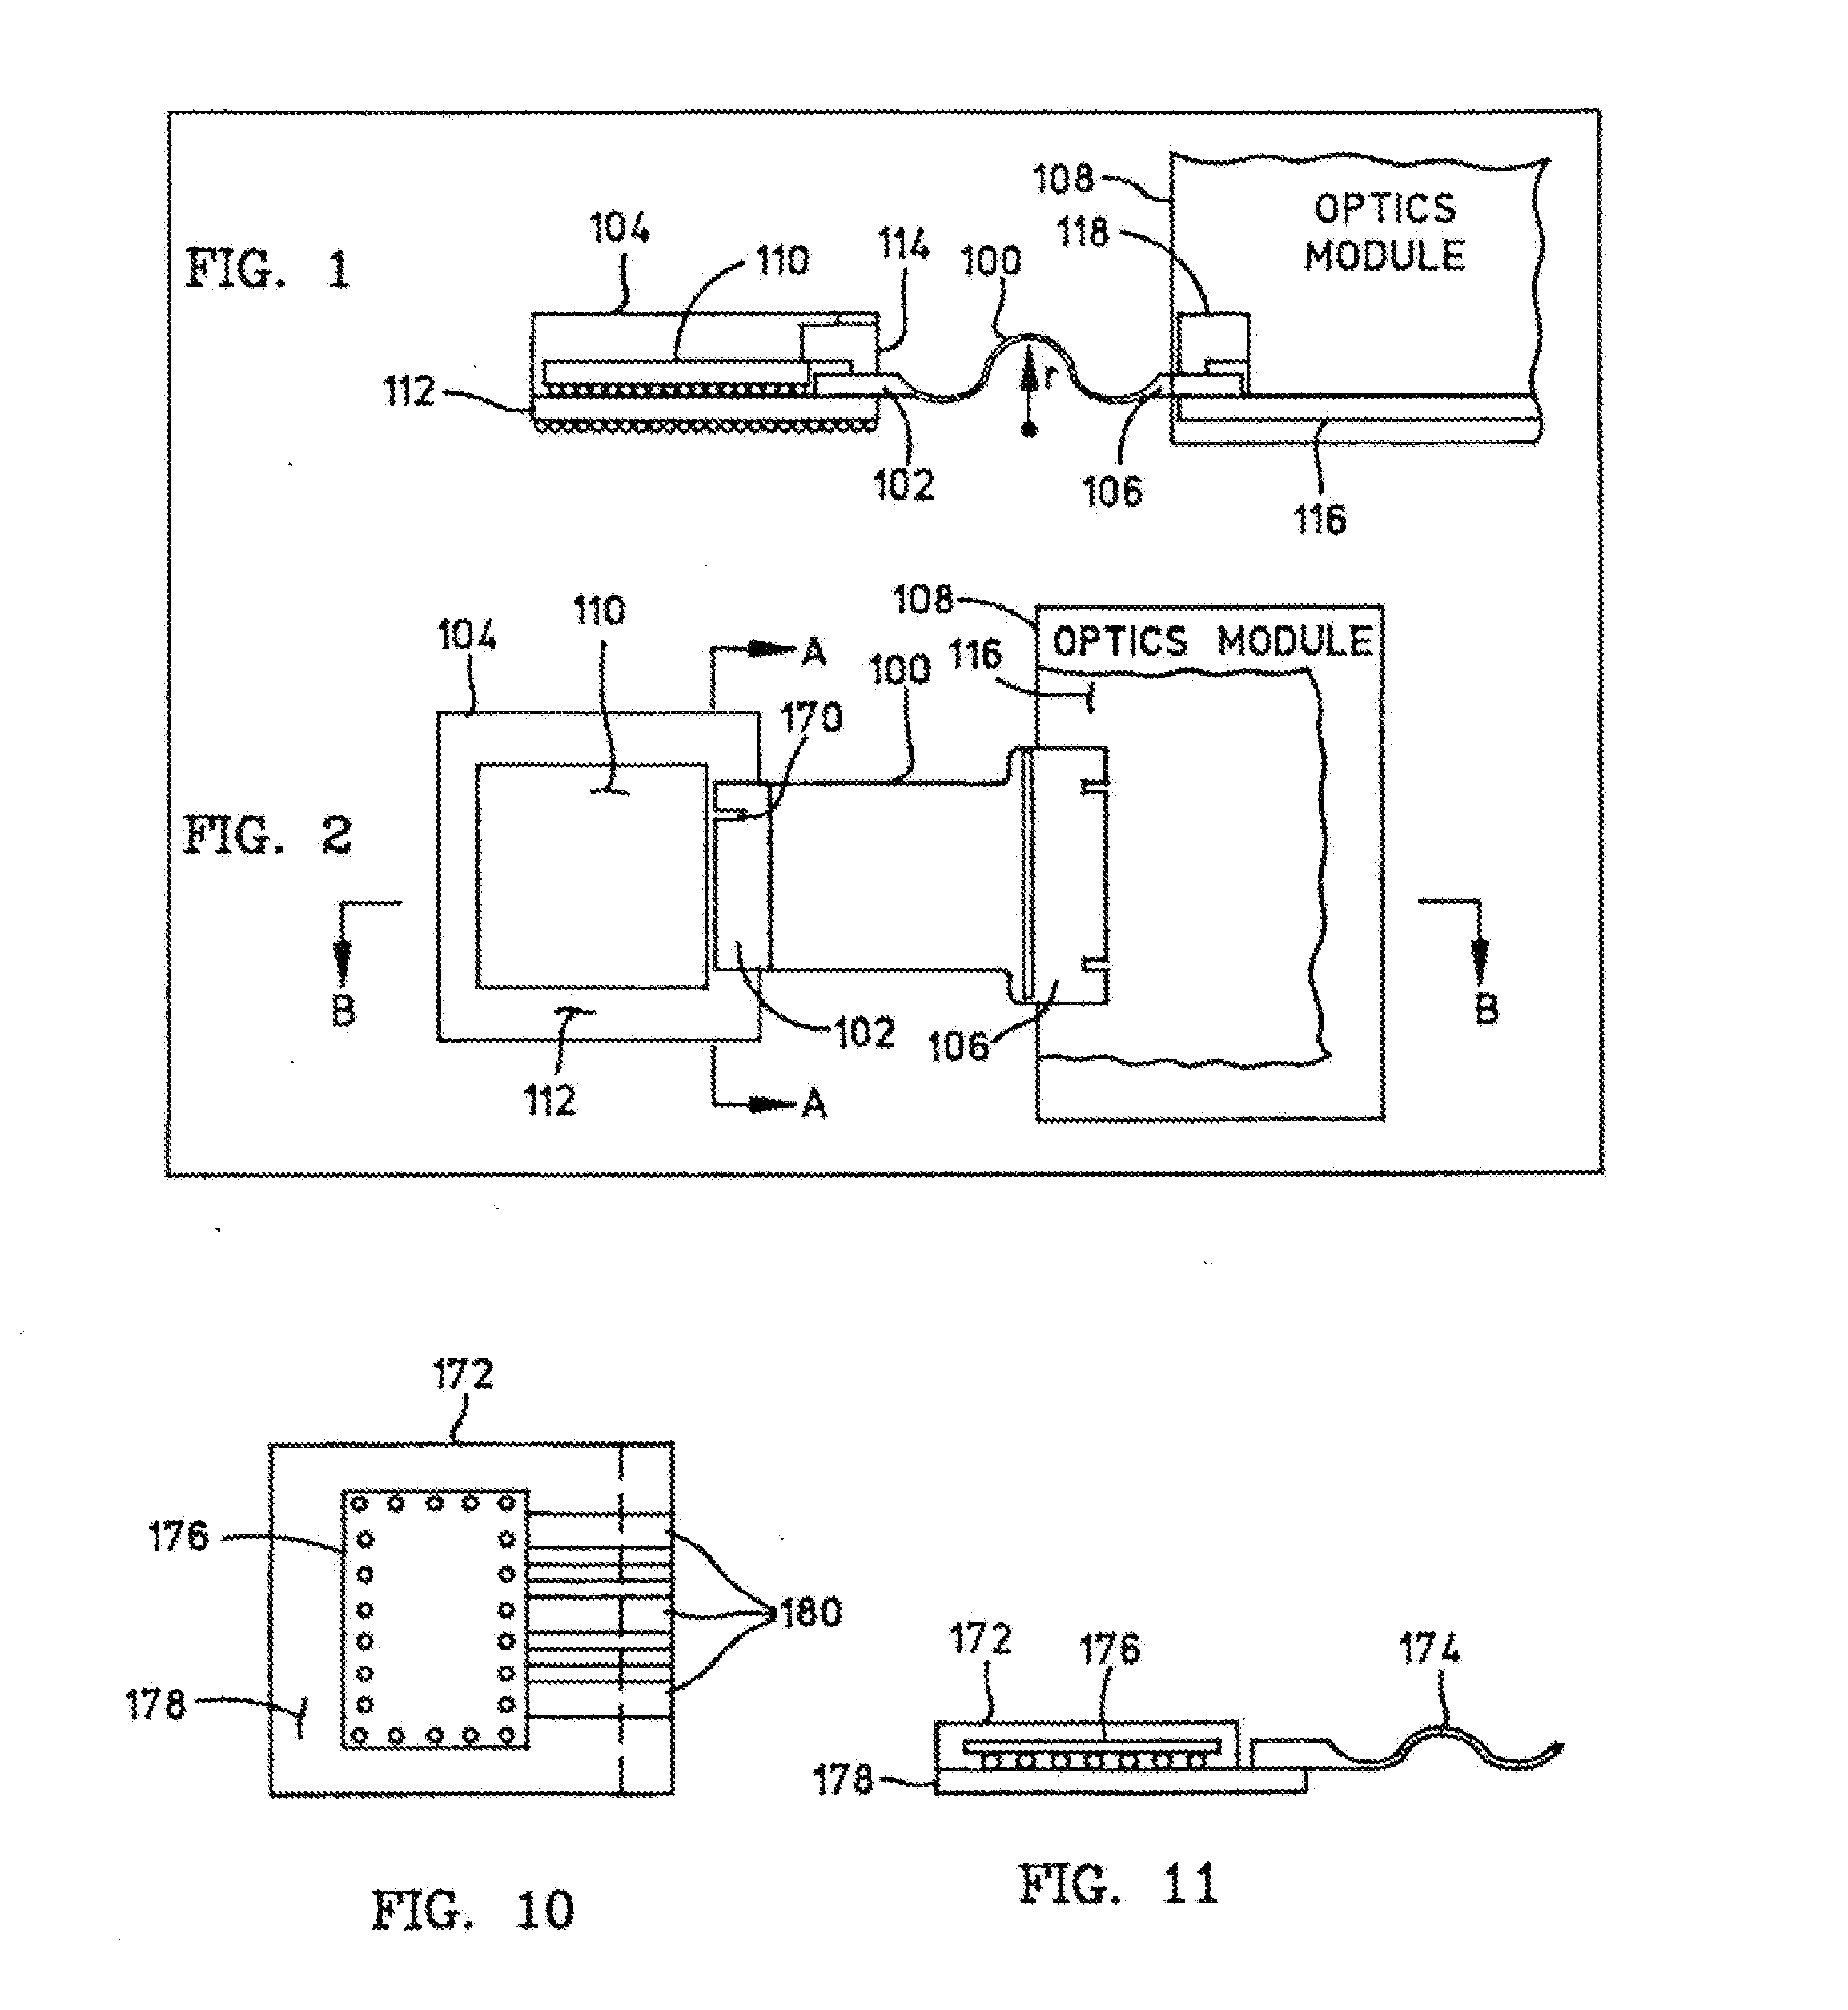 Flexible interconnect cable for an electronic assembly